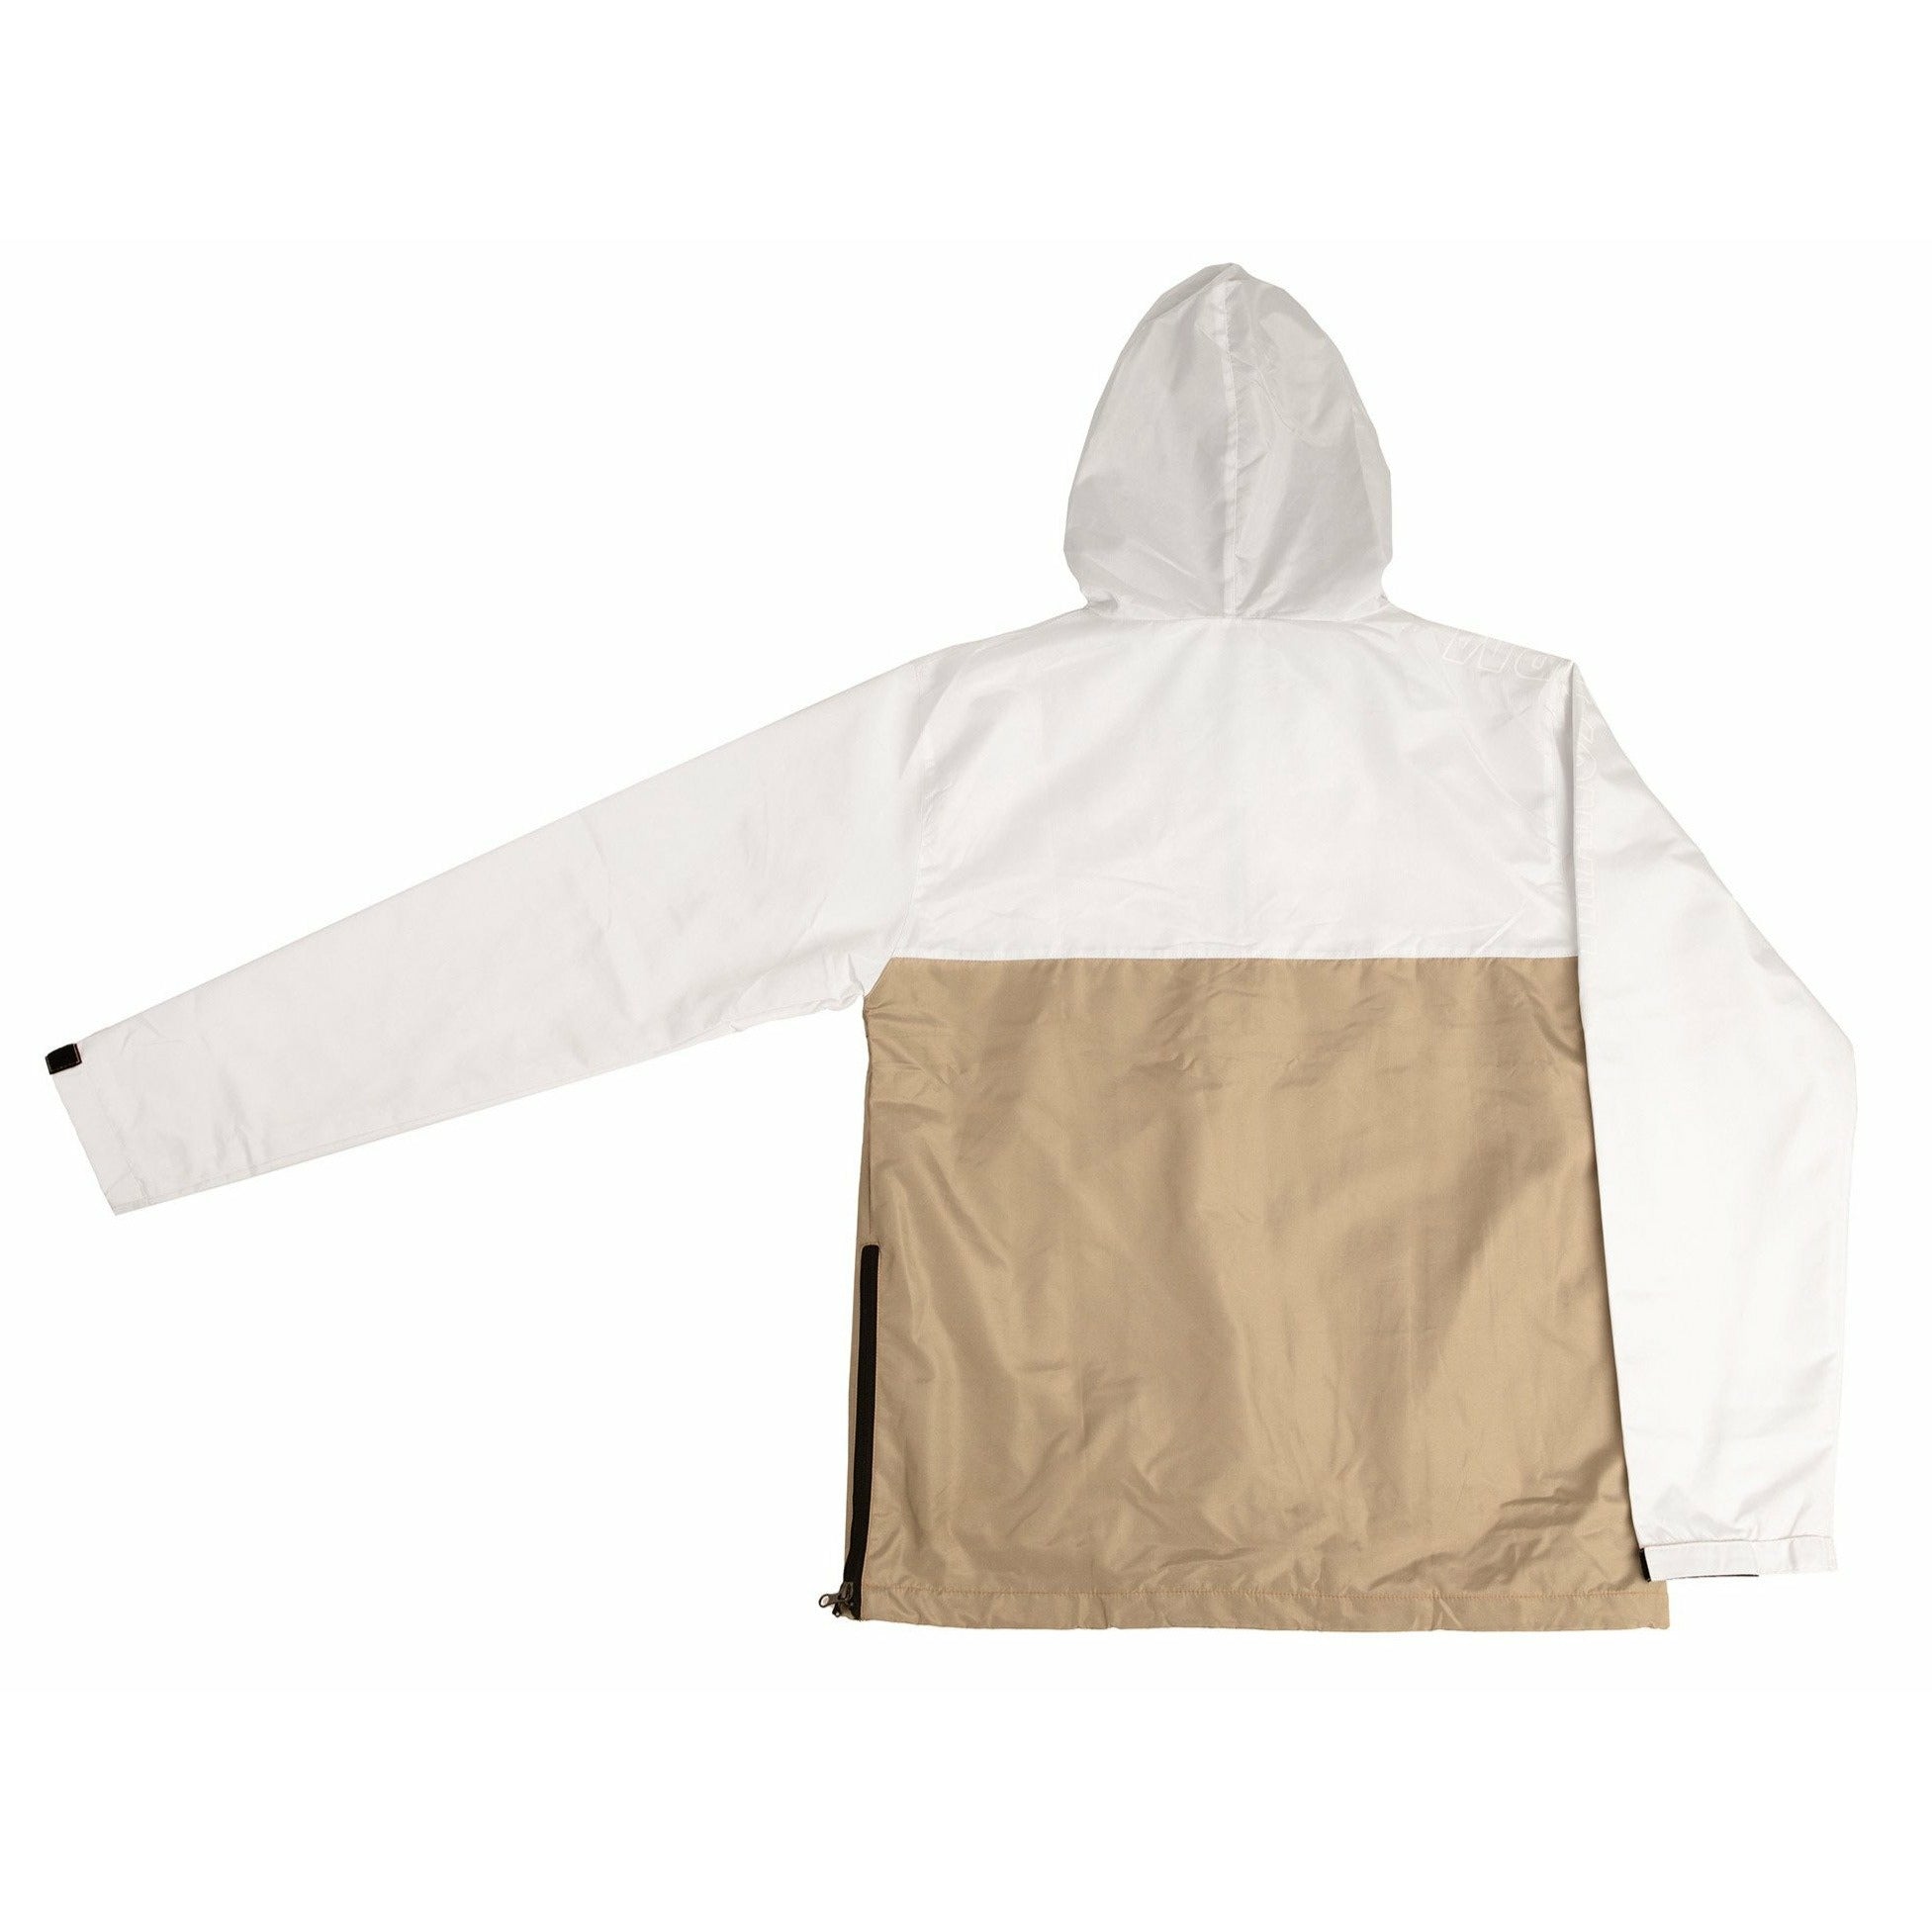 Light Gray The Fast Text Jacket White/Tan